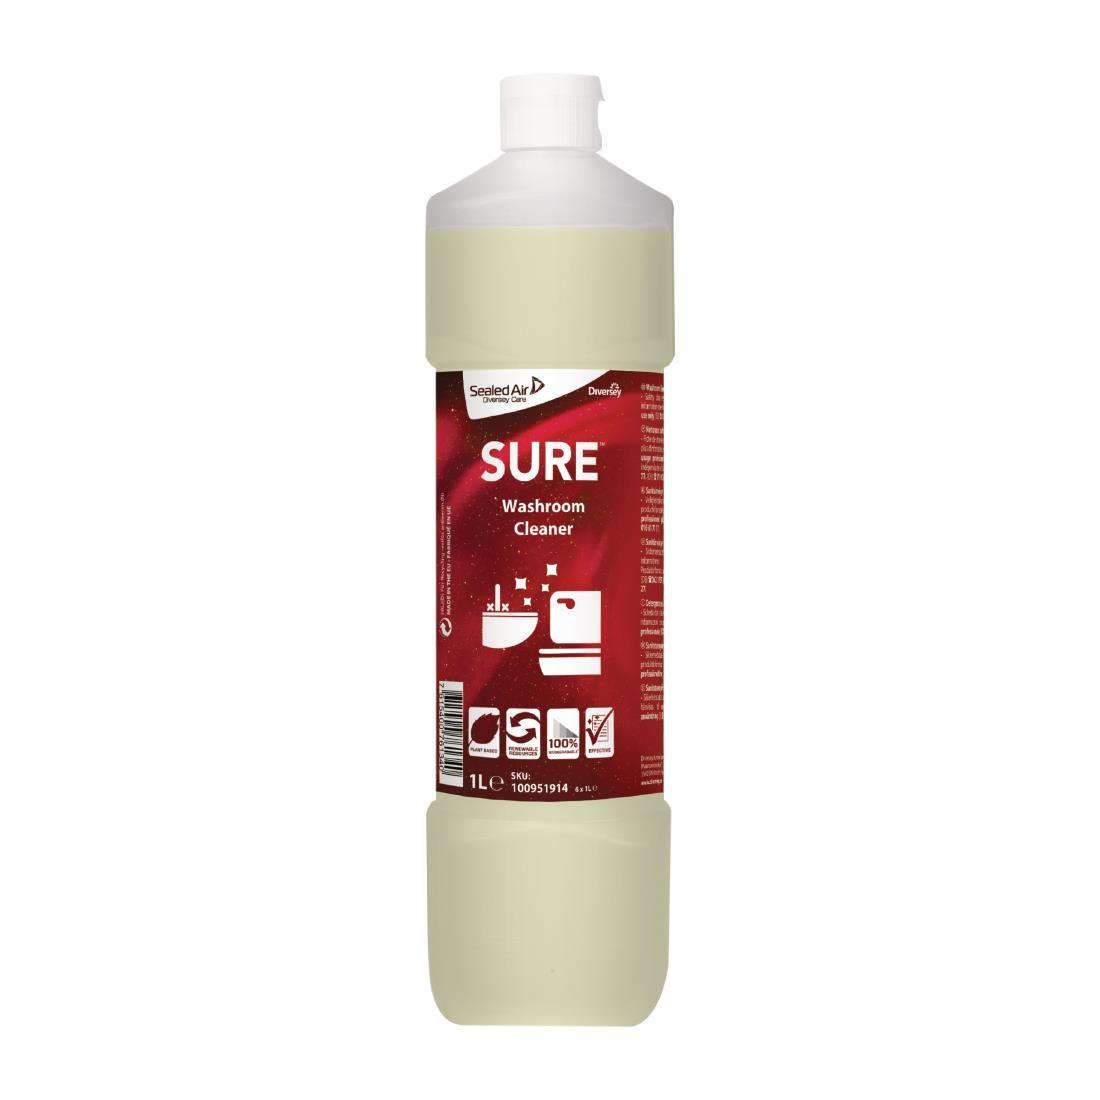 SURE Washroom Cleaner Concentrate 1 Litre (6 Pack) - FA252  - 1